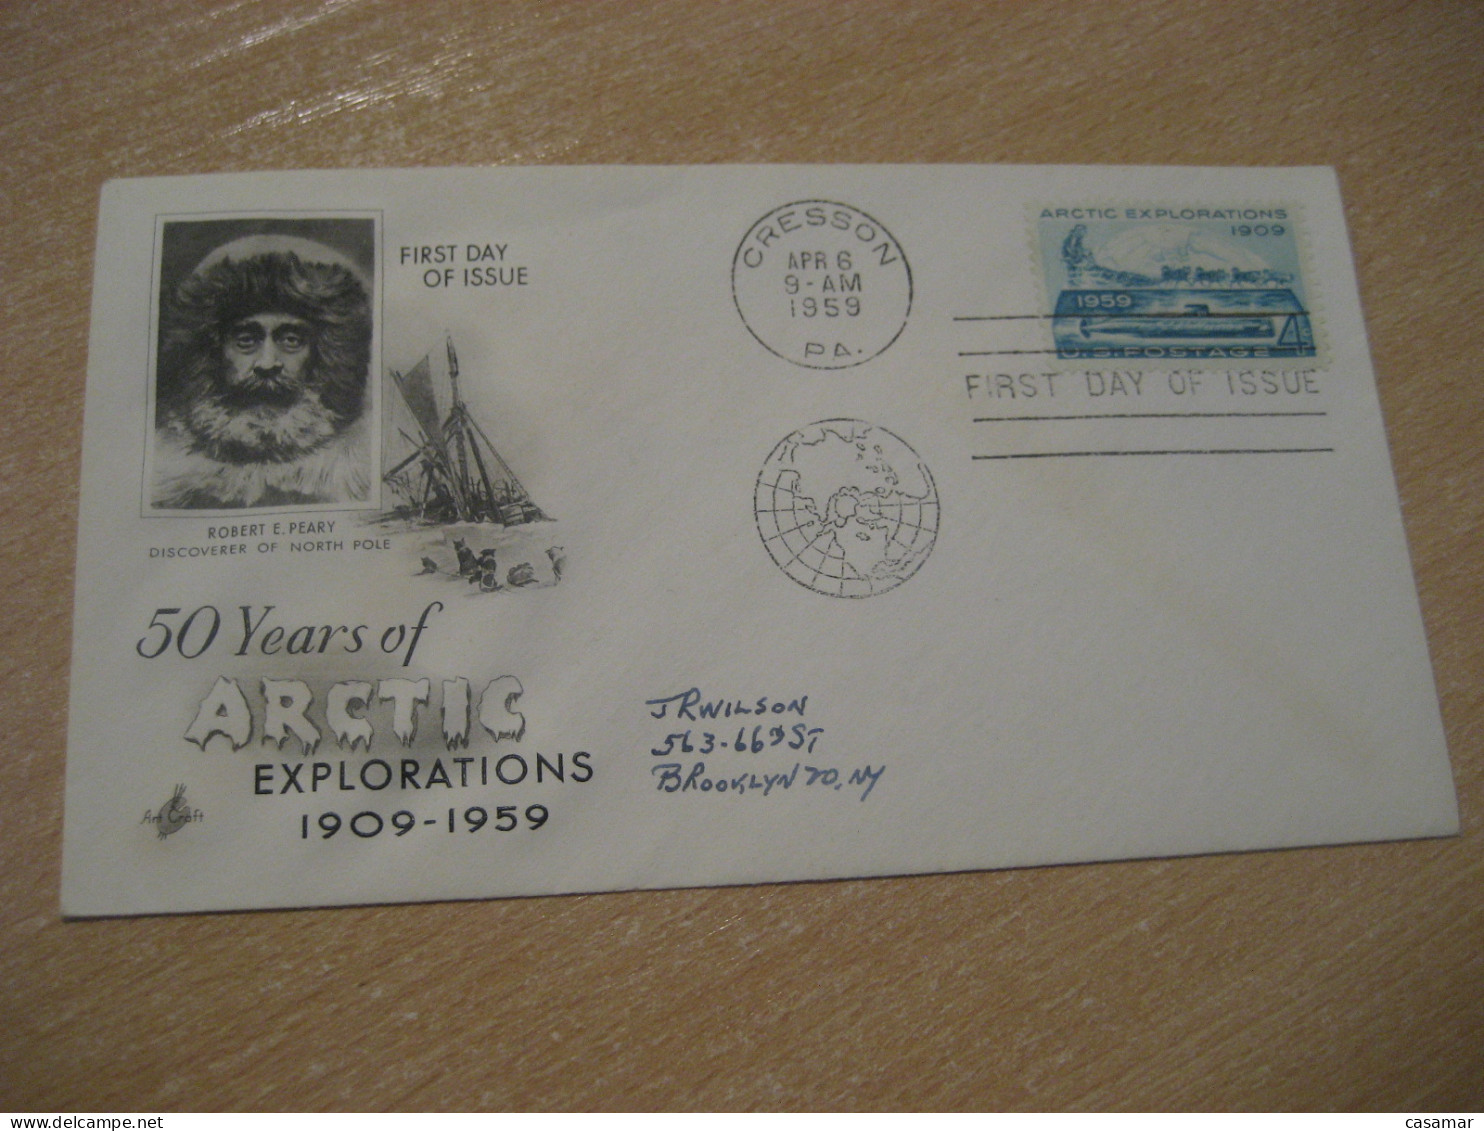 CRESSON 1959 Arctic Explorations Robert E Peary Discoverer North Pole Polar Arctic Submarine U-boot FDC Cancel Cover USA - Arctische Expedities